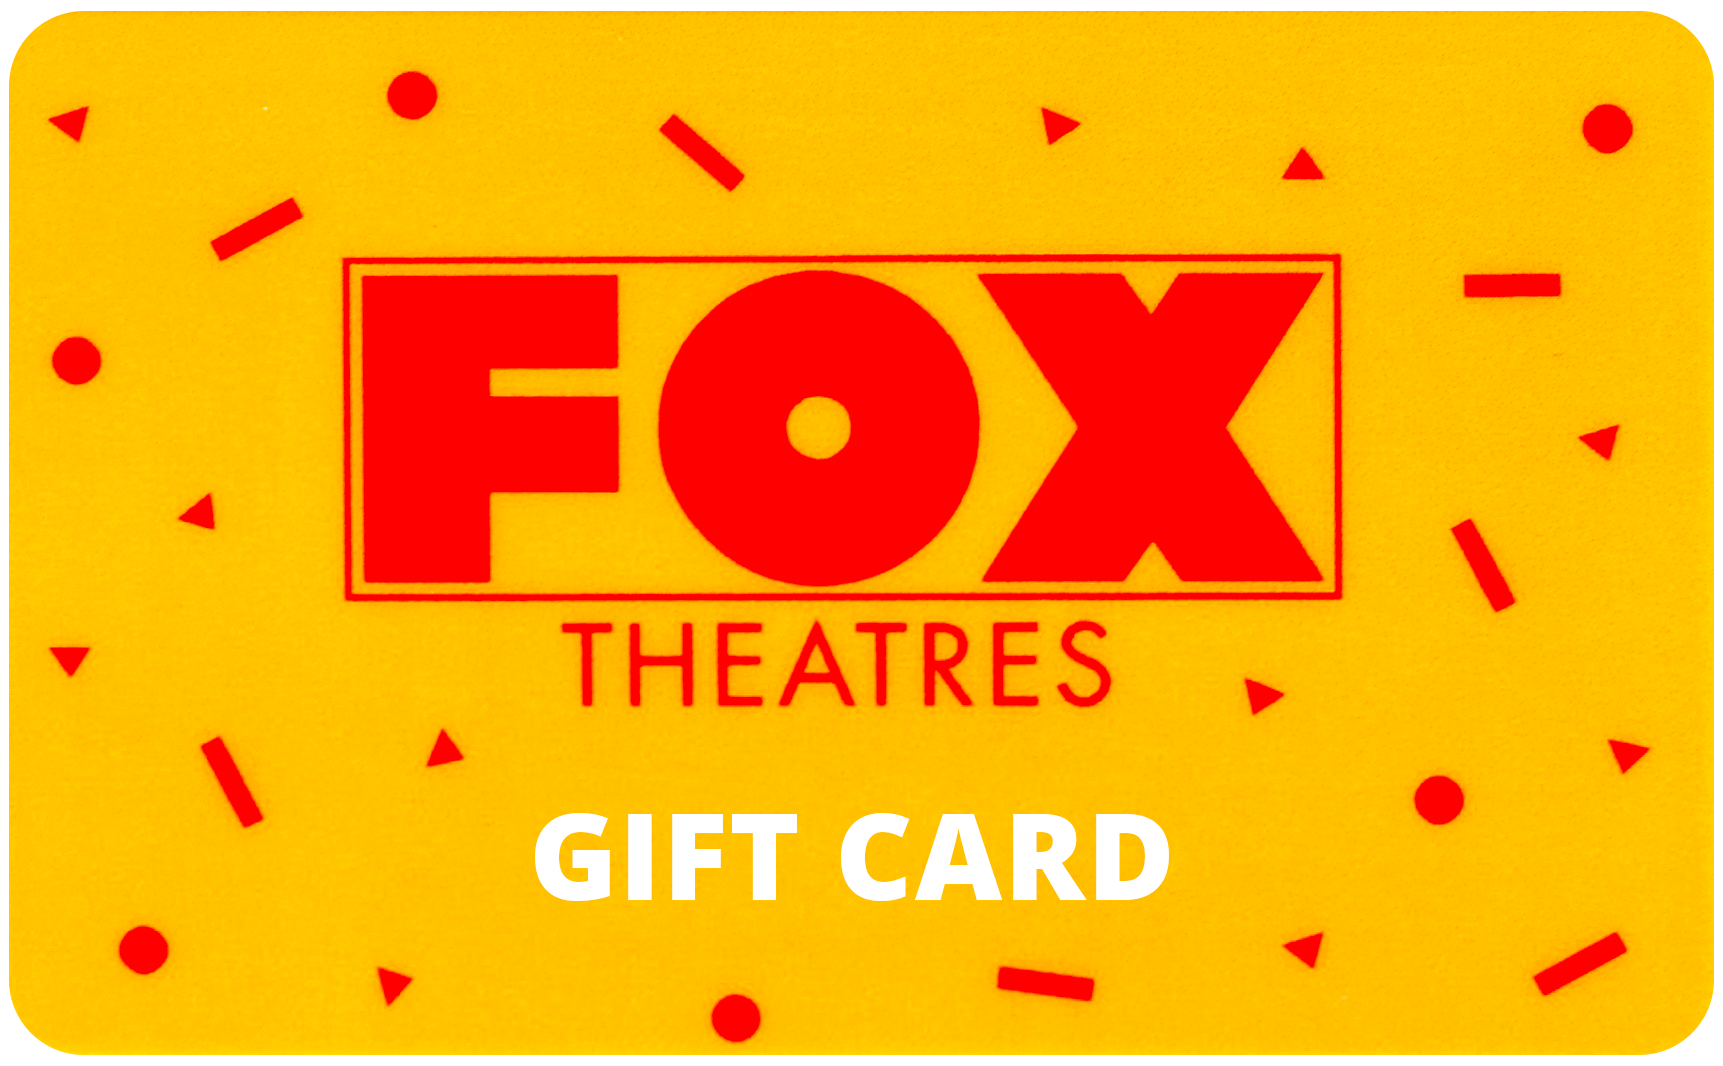 Gift card available at Fox Theatres